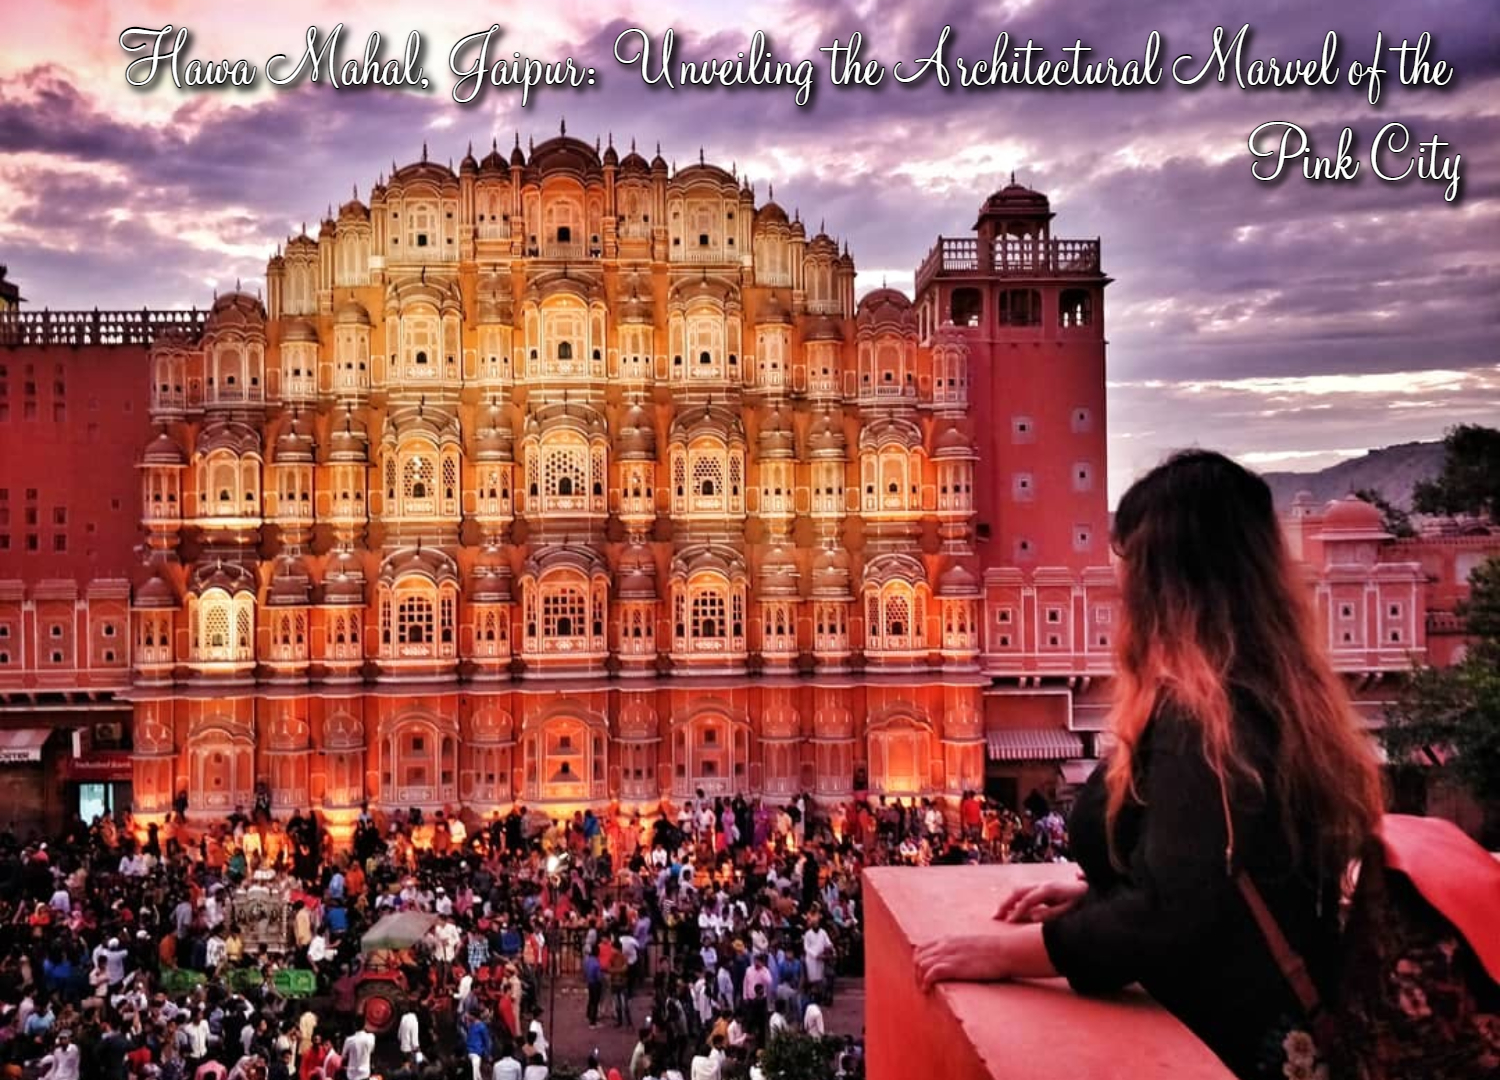 Hawa-Mahal-Jaipur_-Unveiling-the-Architectural-Marvel-of-the-Pink-City.jpg